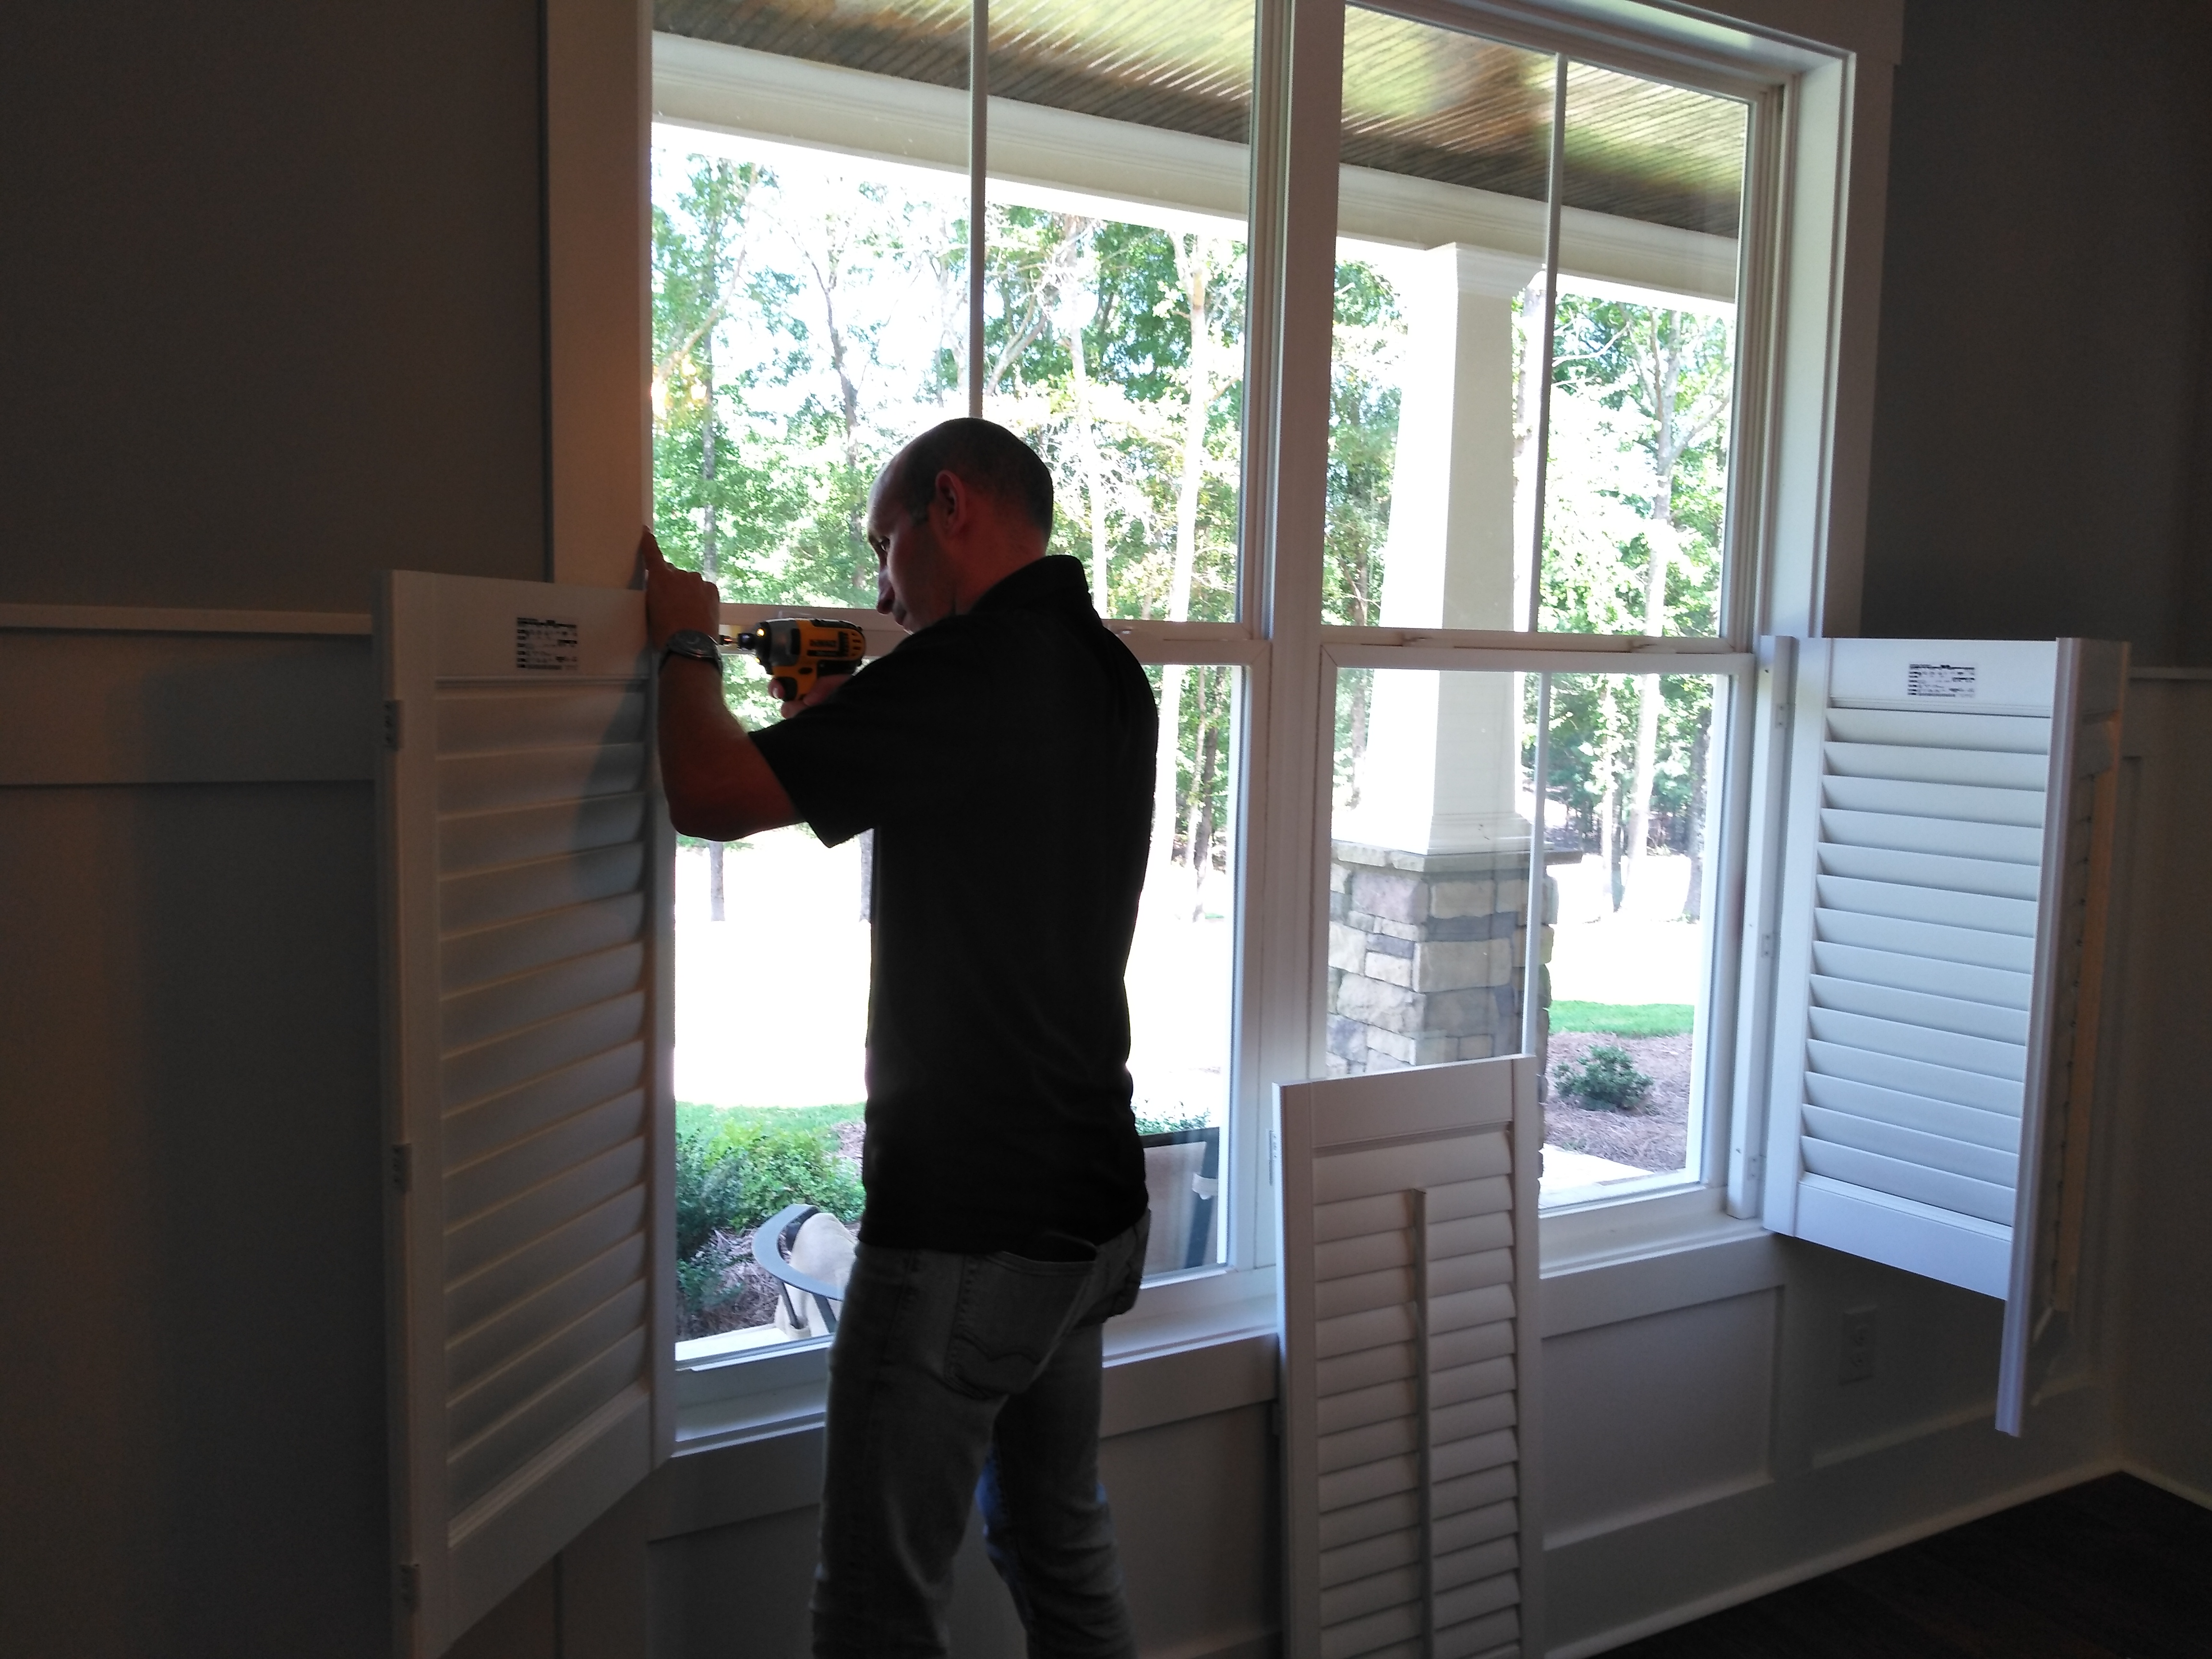 Our professional installers do all the hard work putting your beautiful new window treatments into place. While the DIY approach may save you money on the short-term, wouldn’t you like the security of knowing it has all been done right? Right measurements and  an expert installation - peace of mind